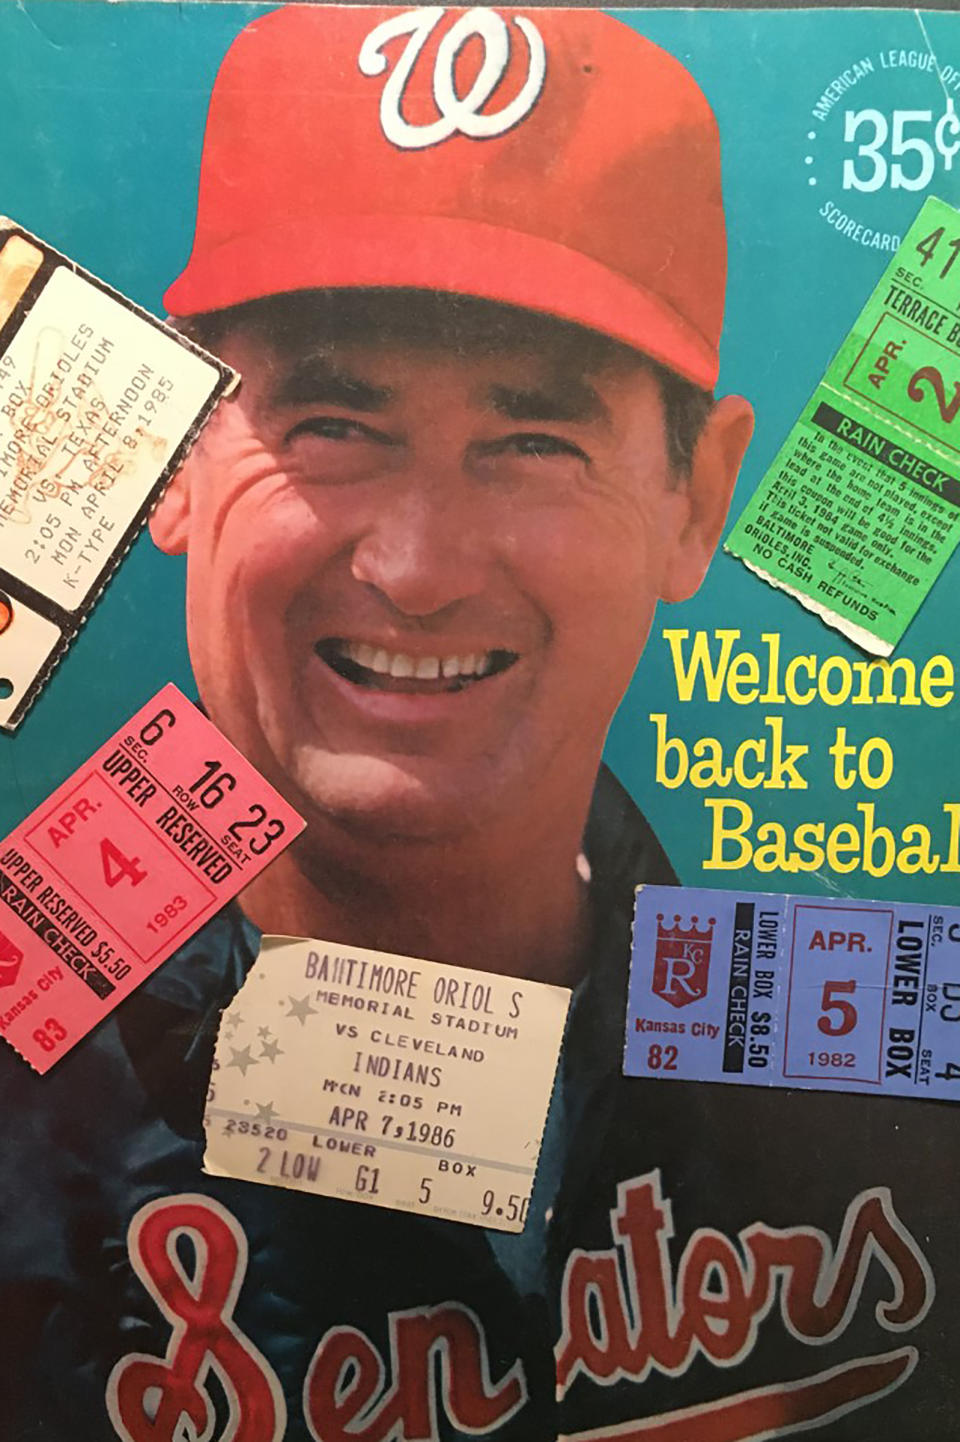 The Washington Senators 1969 opening day program featuring Ted Williams, adorned with ticket stubs from opening days in the 1980's is shown in New York, Monday, March 23, 2020. To baseball fans, opening day is an annual rite of spring that evokes great anticipation and warm memories. This year's season was scheduled to begin Thursday, March 26, 2020, but there will be no games for a while because of the coronavirus outbreak. (AP Photo/Ben Walker)